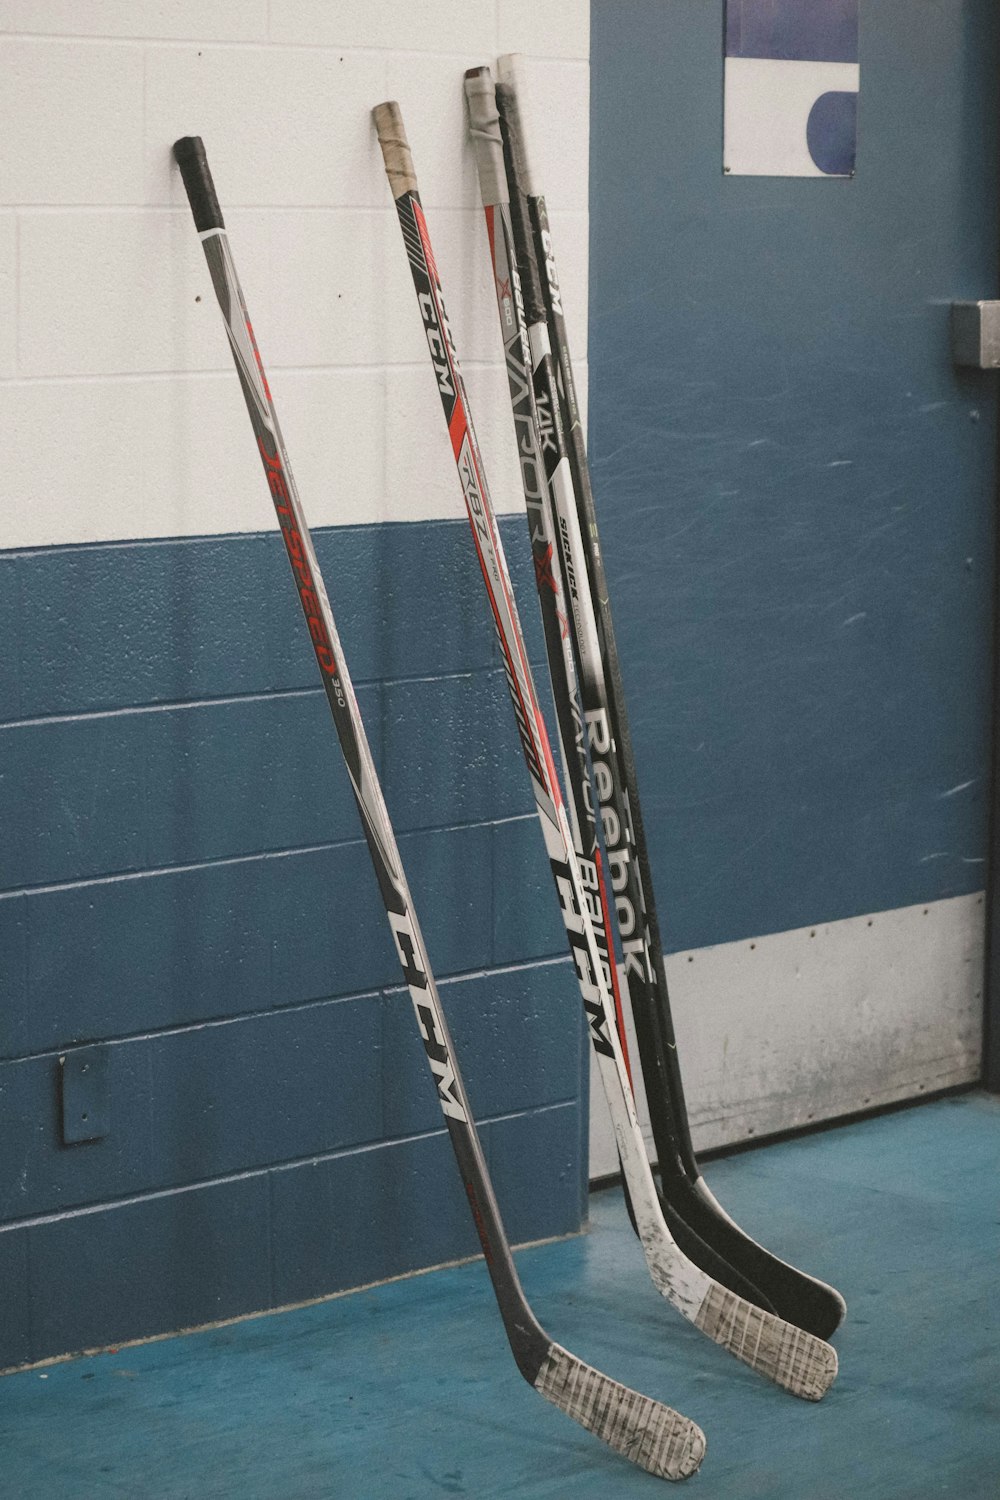 two hockey sticks leaning against a wall in a gym